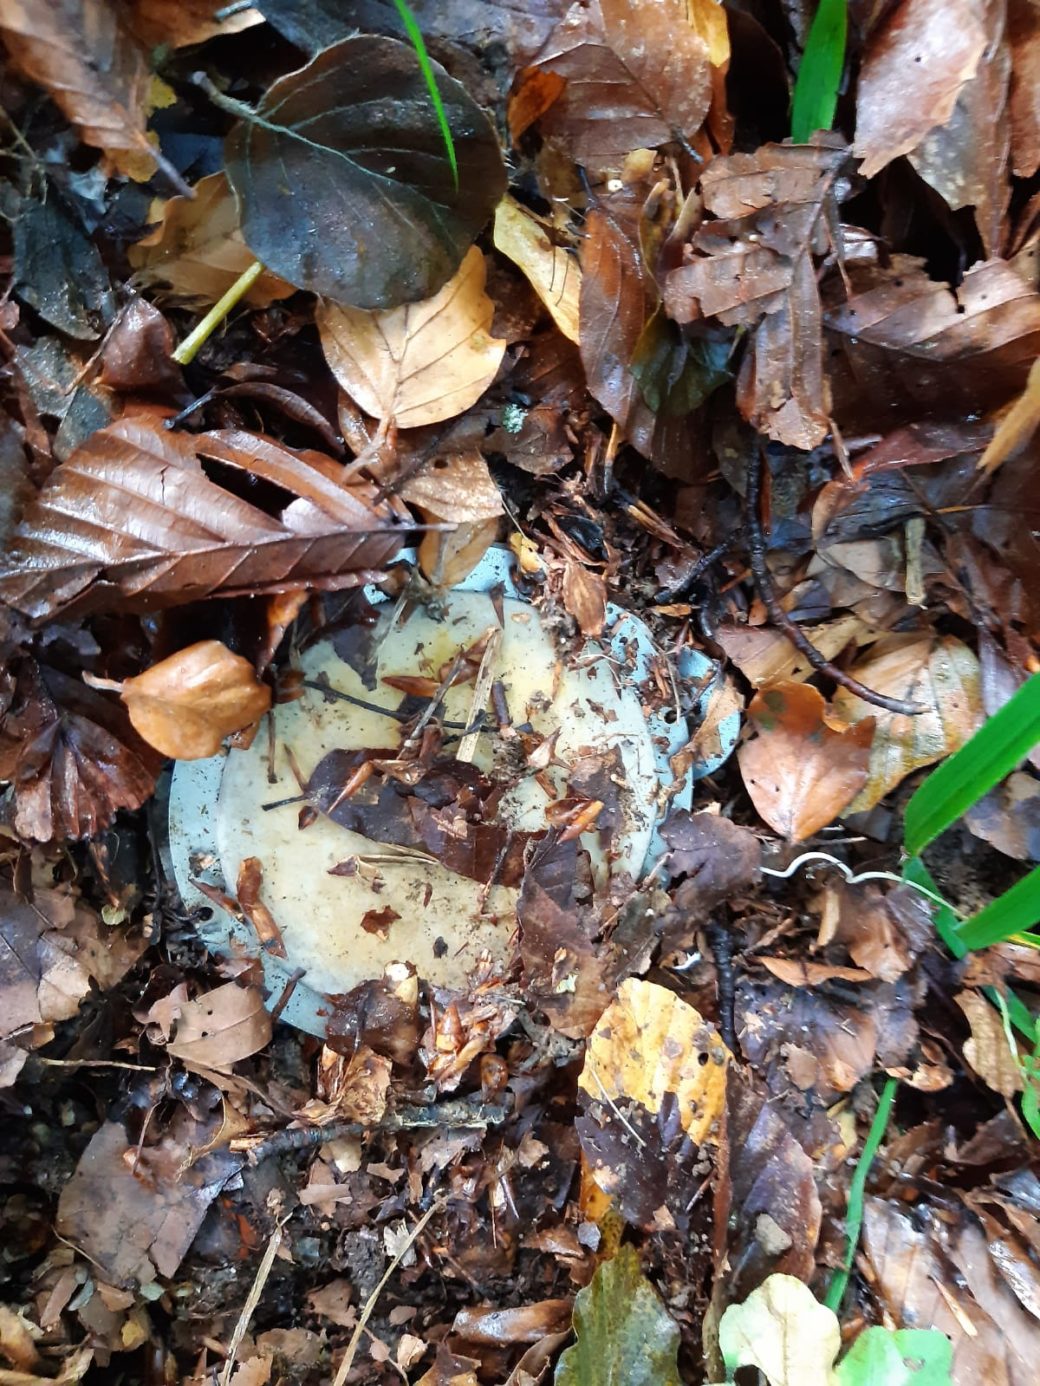 Picture: The photo shows a ground covered with wilted leaves and twigs photographed from above, with a mineral mixture container partially concealed between the leaves.